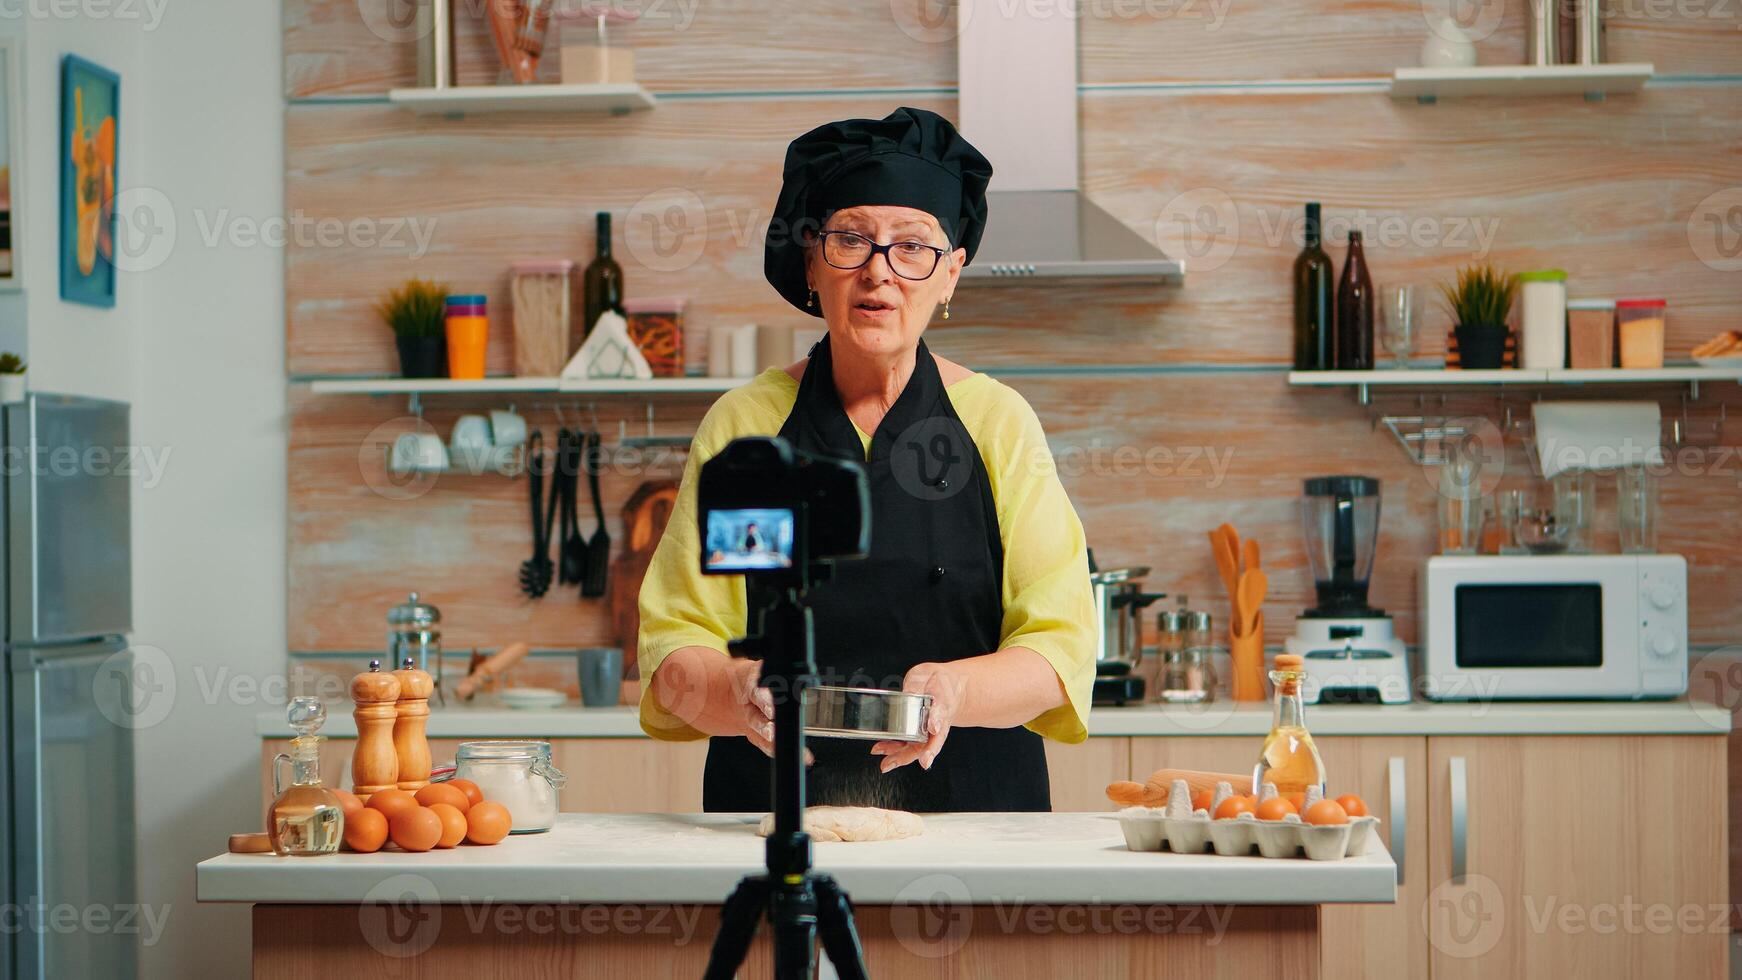 Happy elderly baker woman filming cooking vlog in home kitchen. Retired blogger chef influencer using internet technology communicating, shooting blogging on social media with digital equipment photo